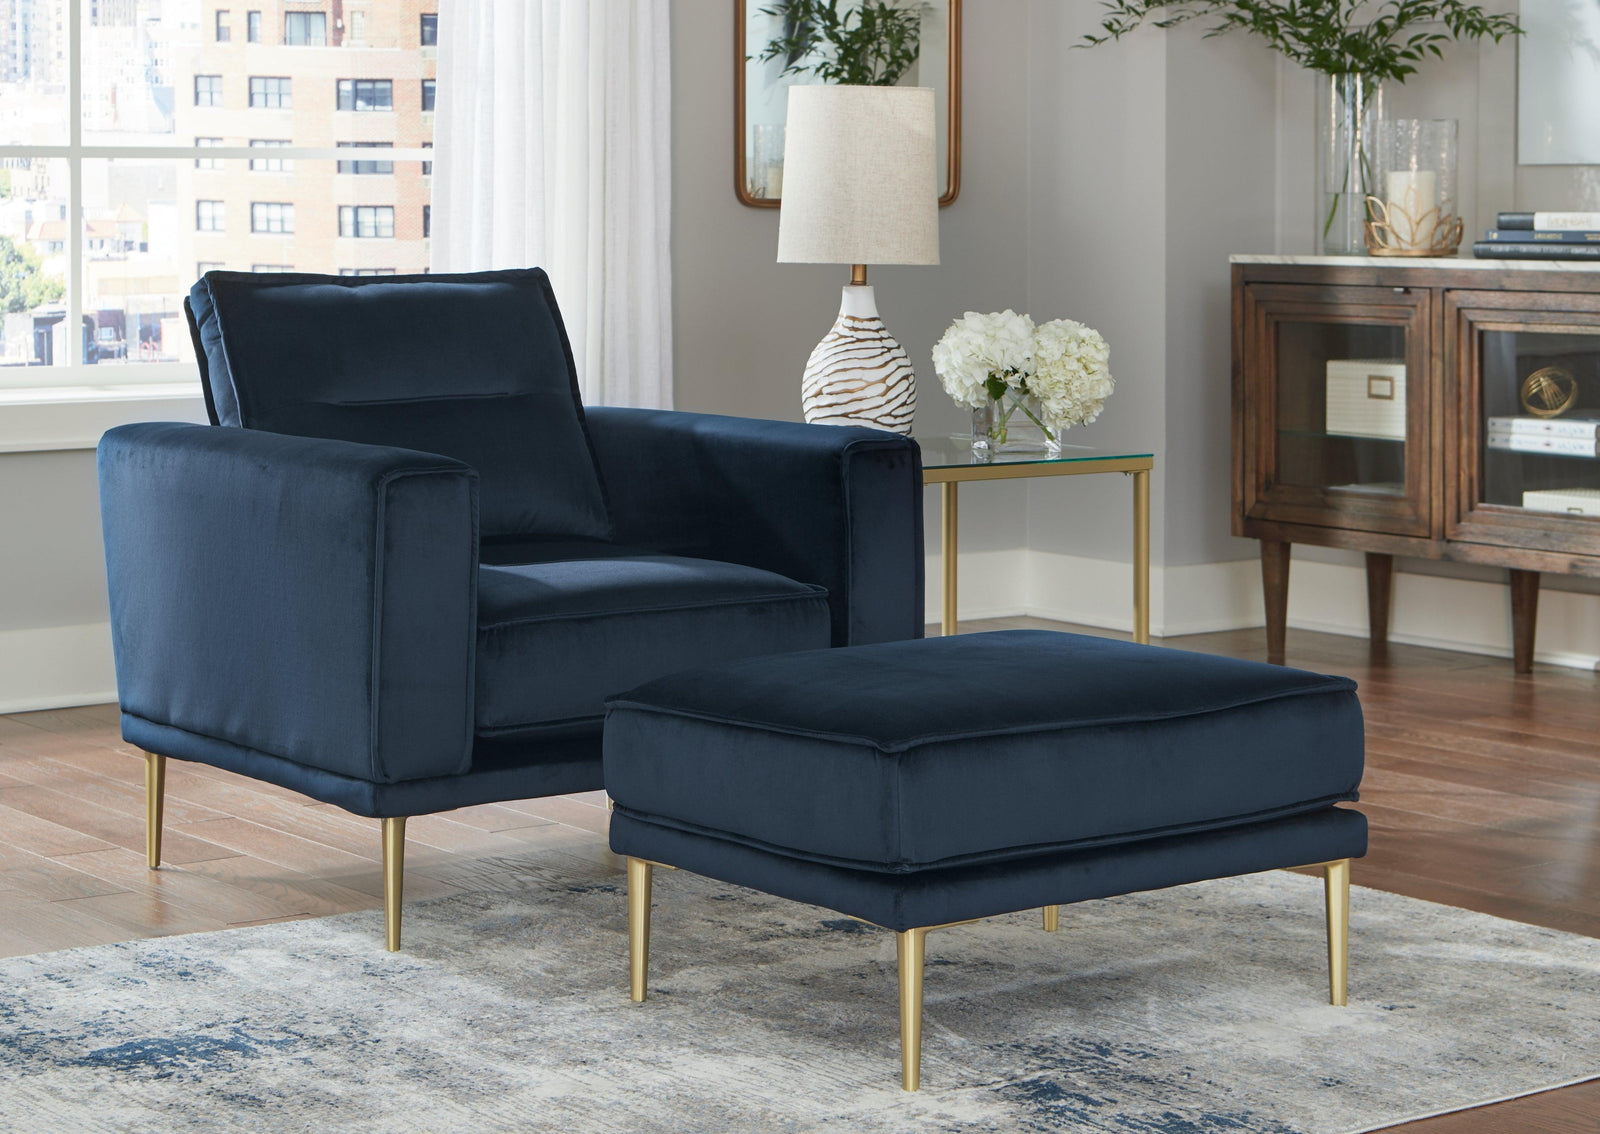 Macleary Navy Chair And Ottoman - Ella Furniture